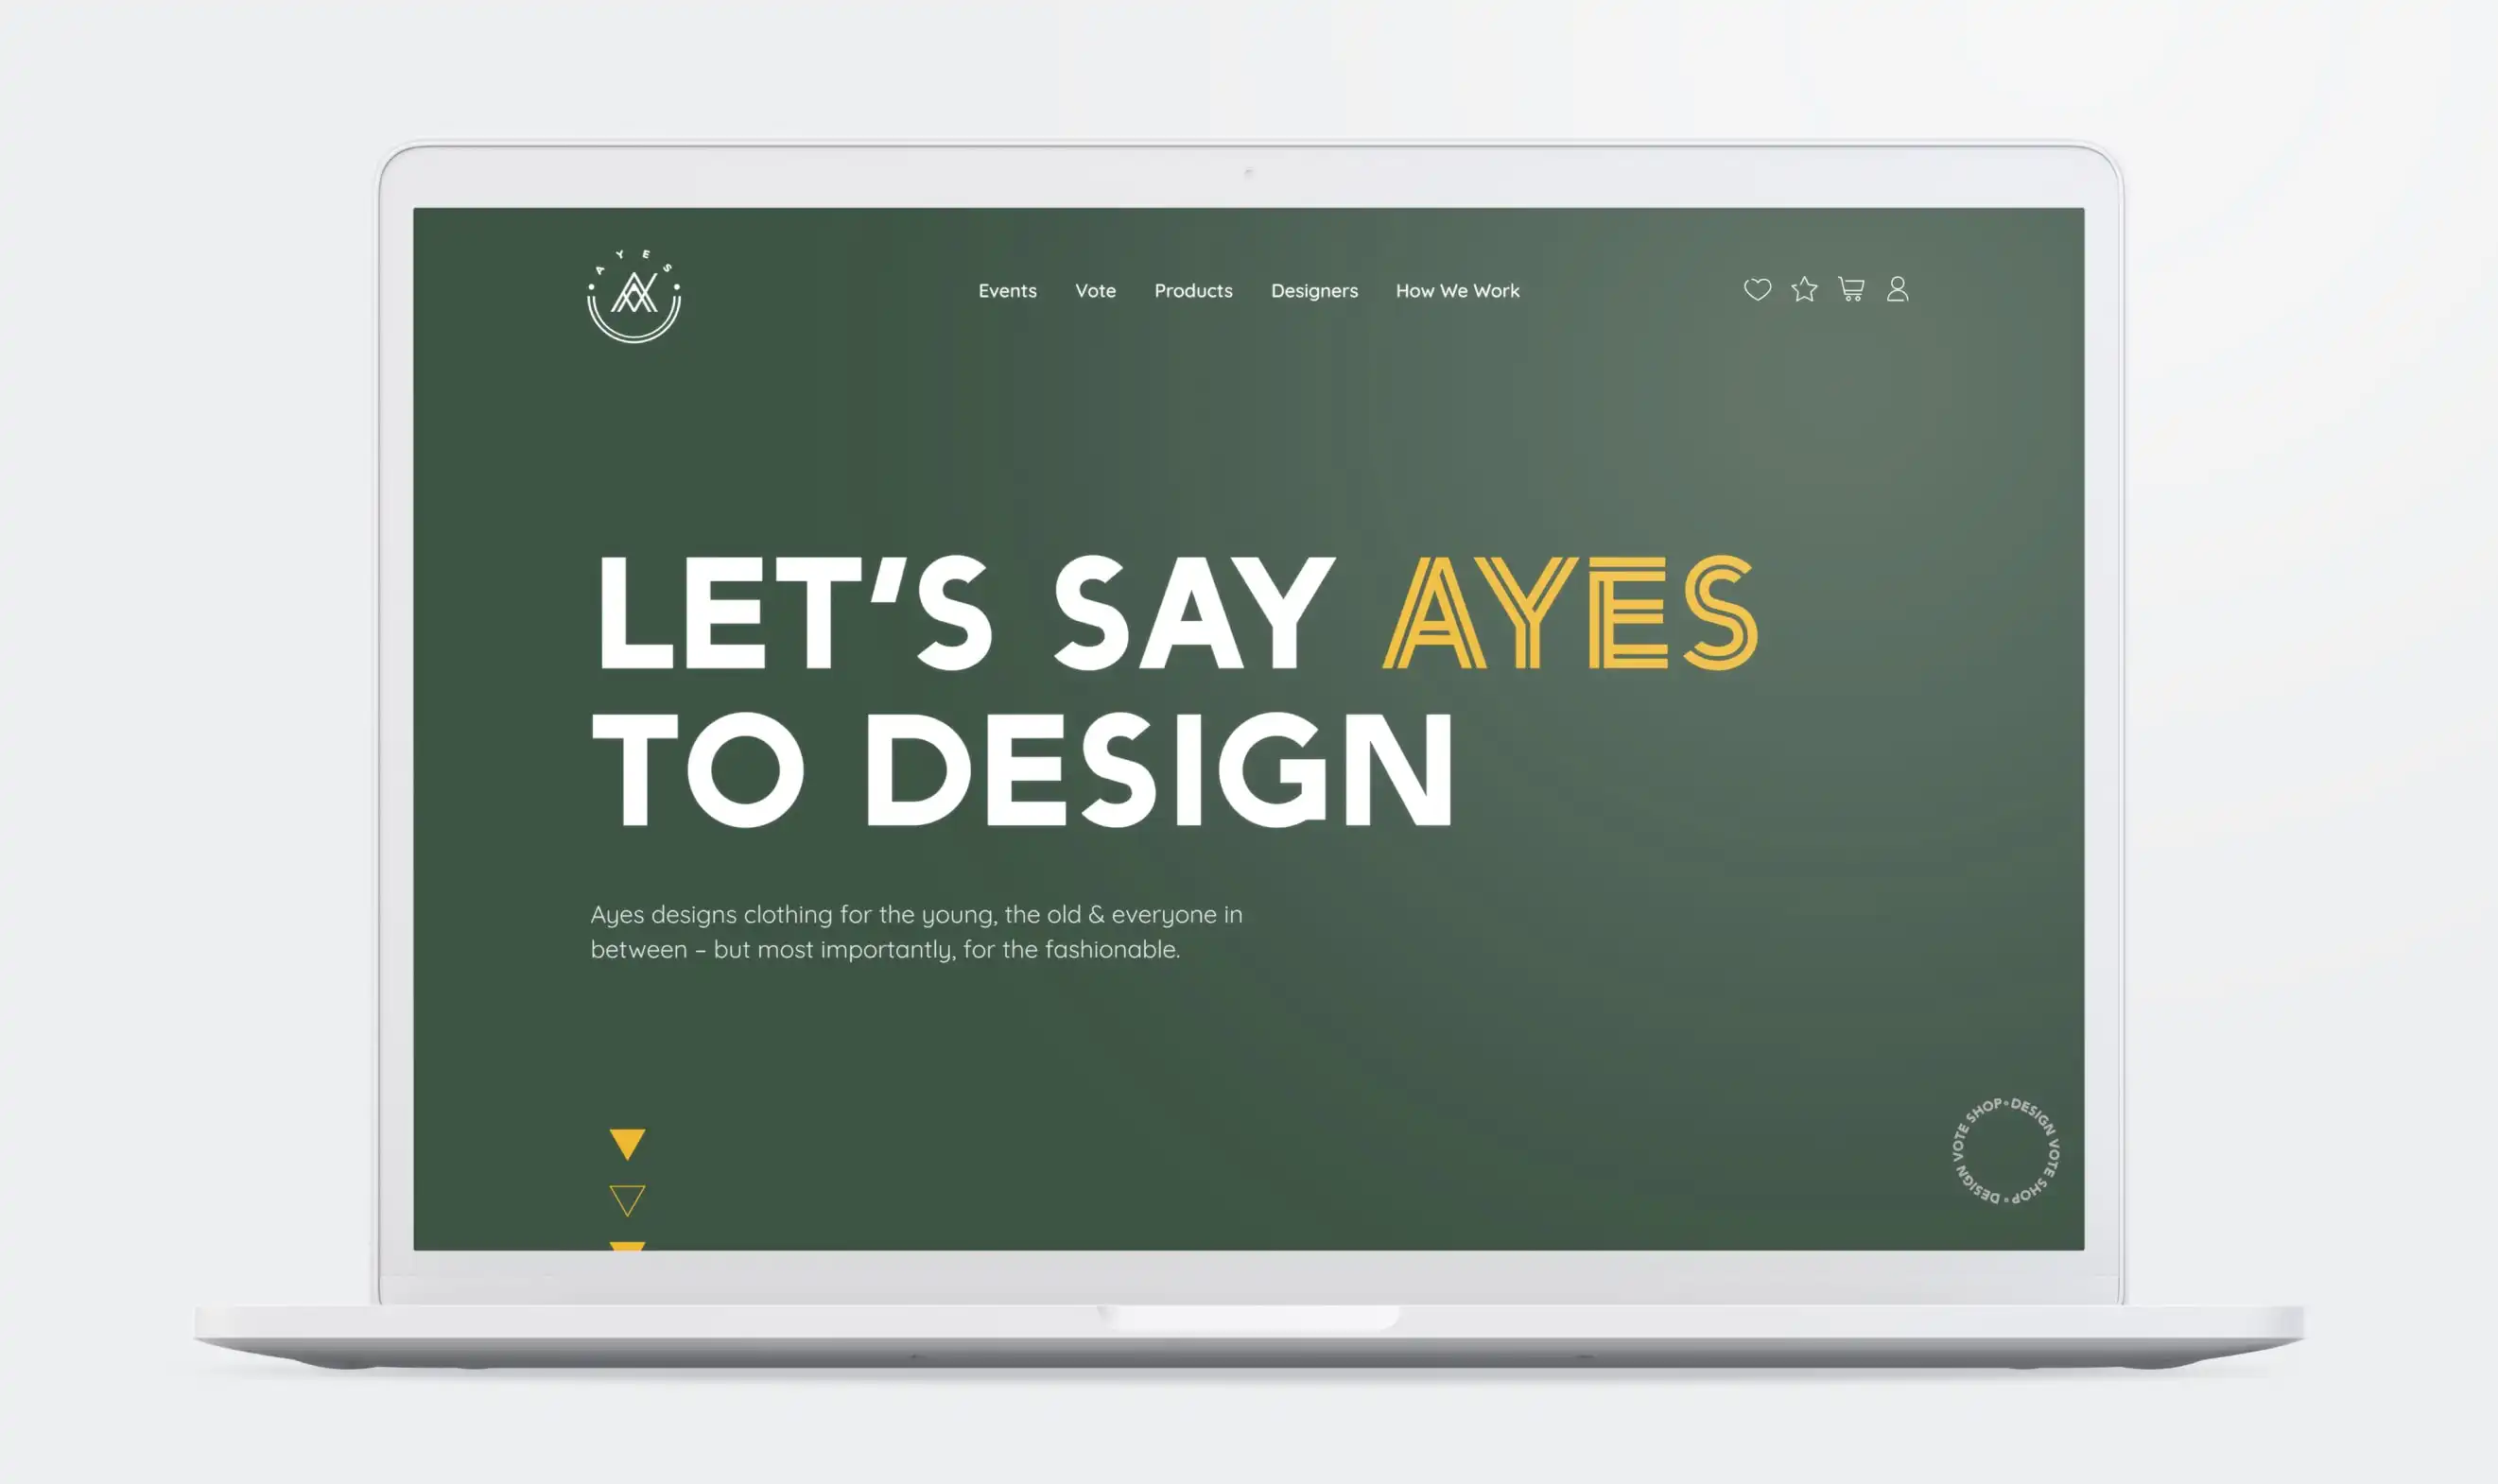 A “Let’s Say Ayes To Design” slogan with a dark green background shows on the laptop screen